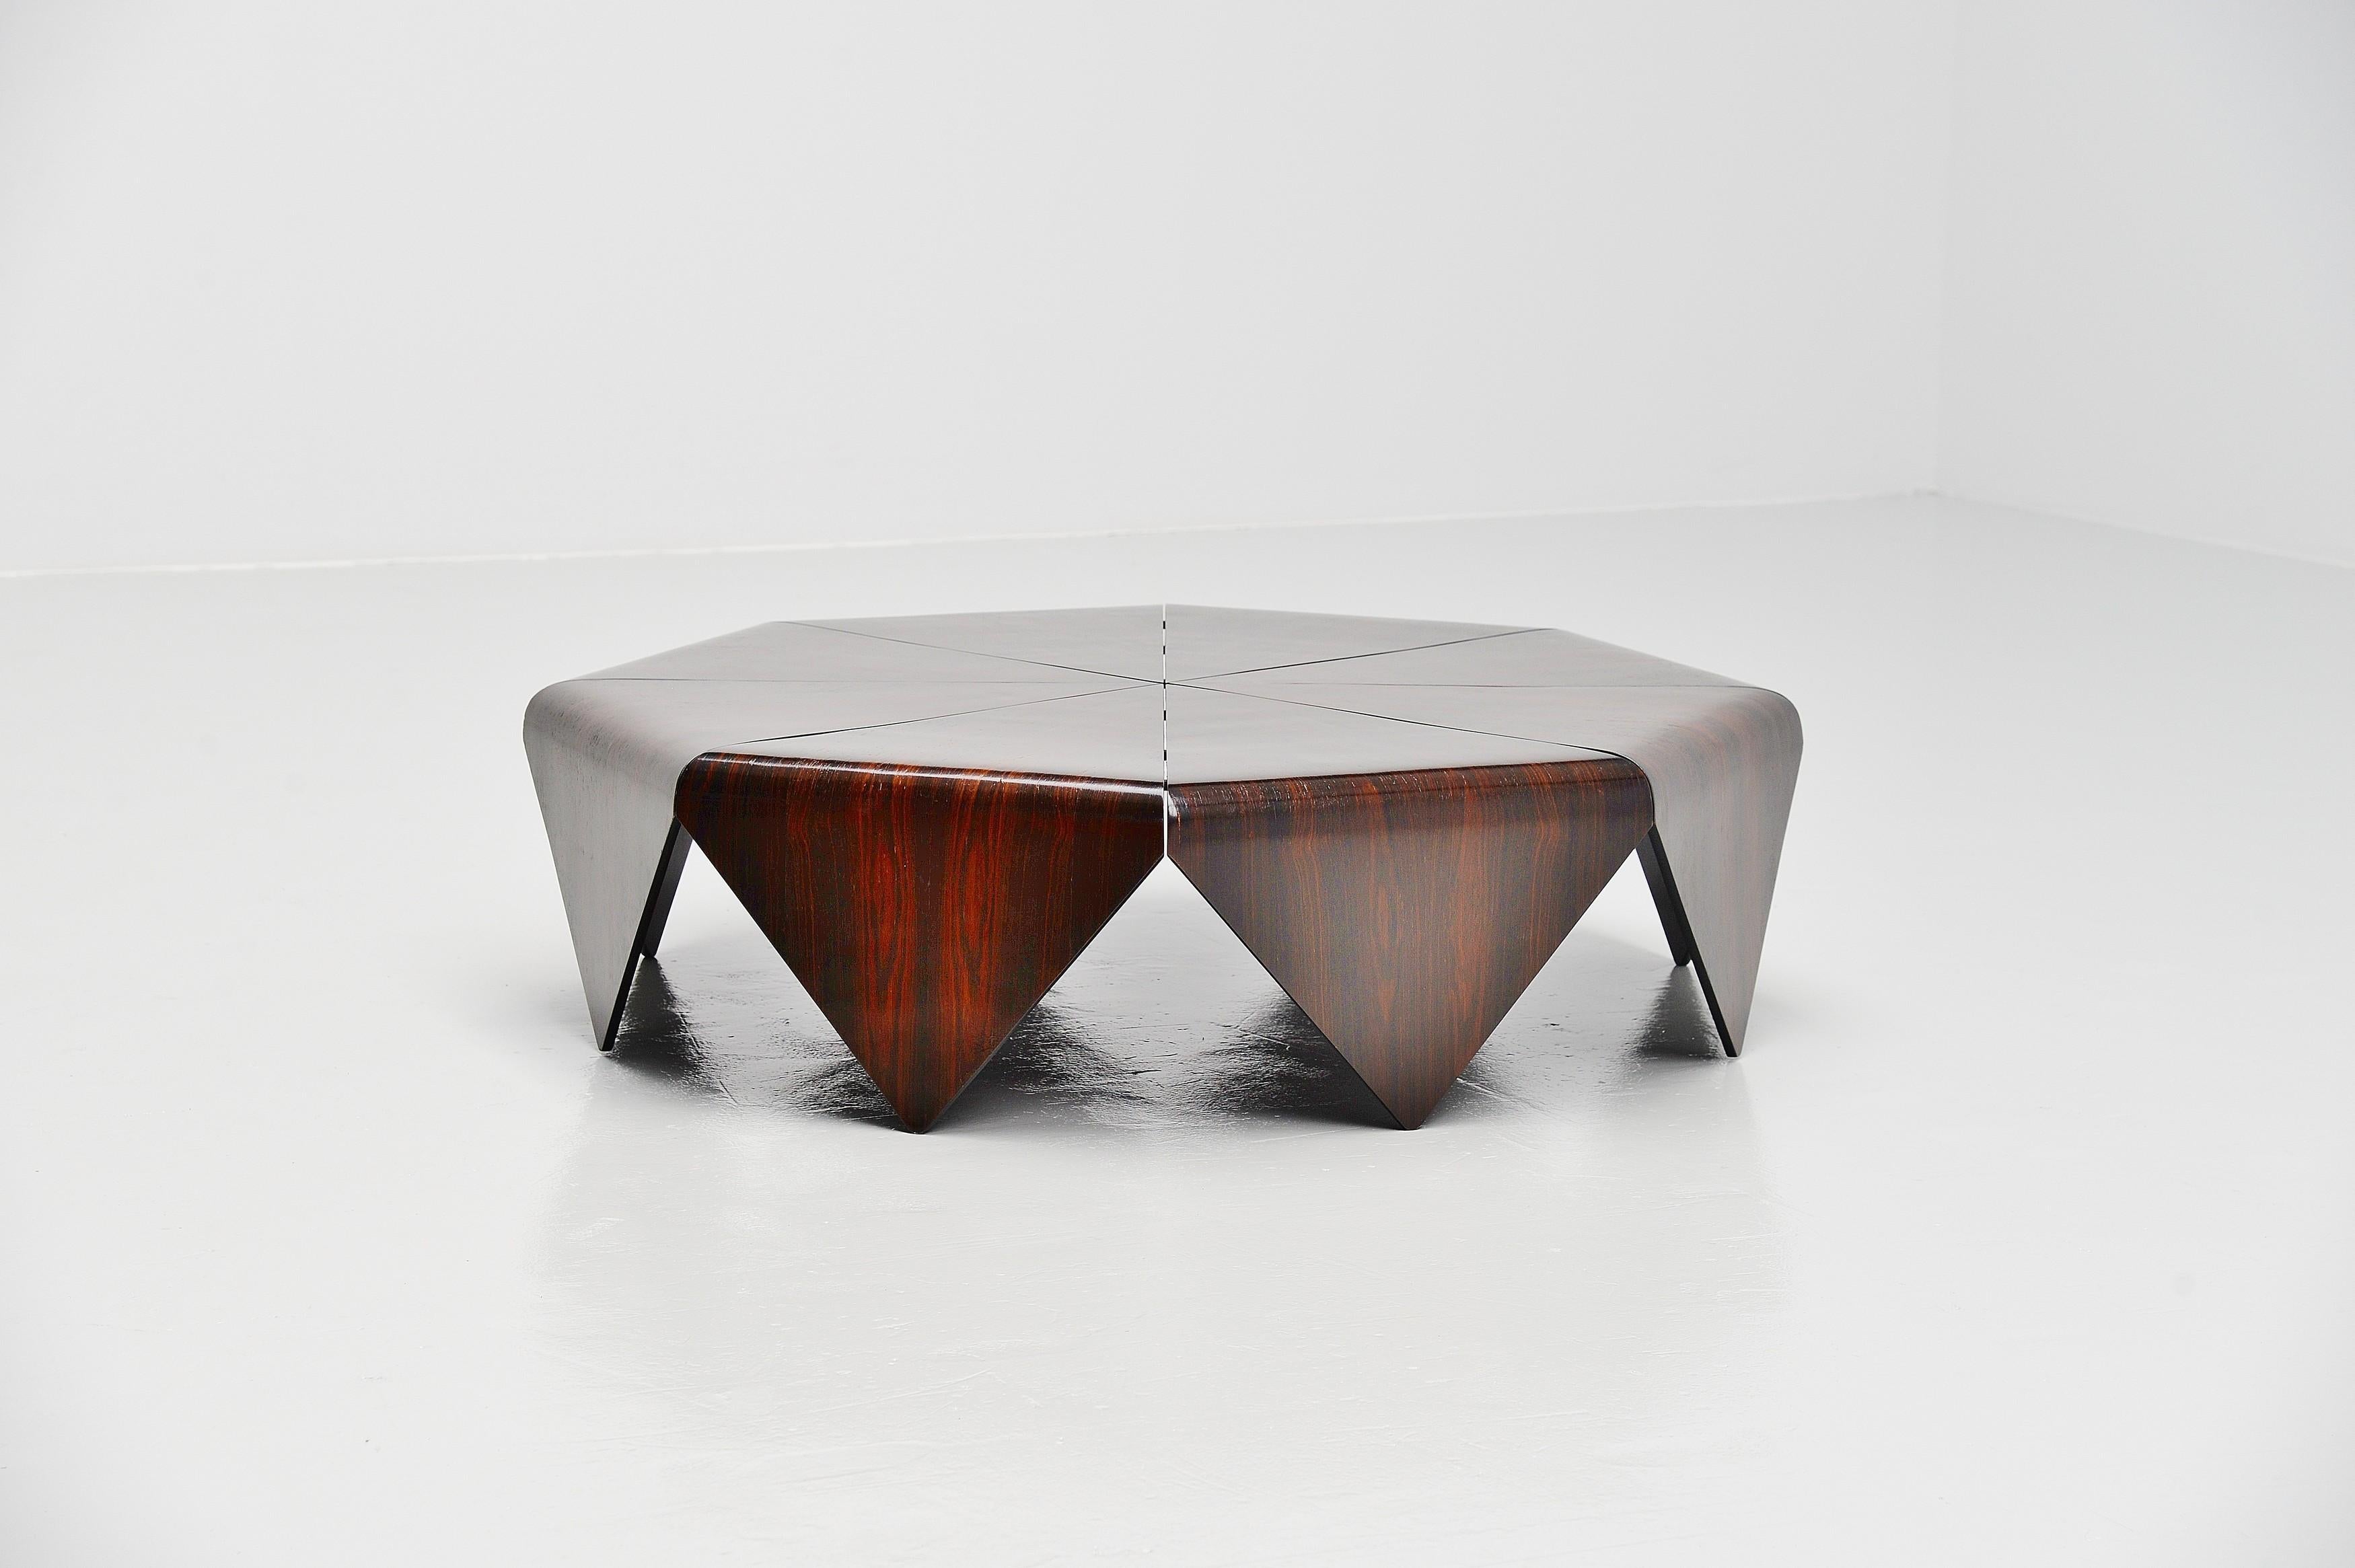 Beautiful and rare so called 'Petalas' coffee table designed by recently passed away designer Jorge Zalszupin, manufactured in his own company L'Atelier, Brazil 1959. The Petalas table was inspirede by a folded paper structure of origami. This table